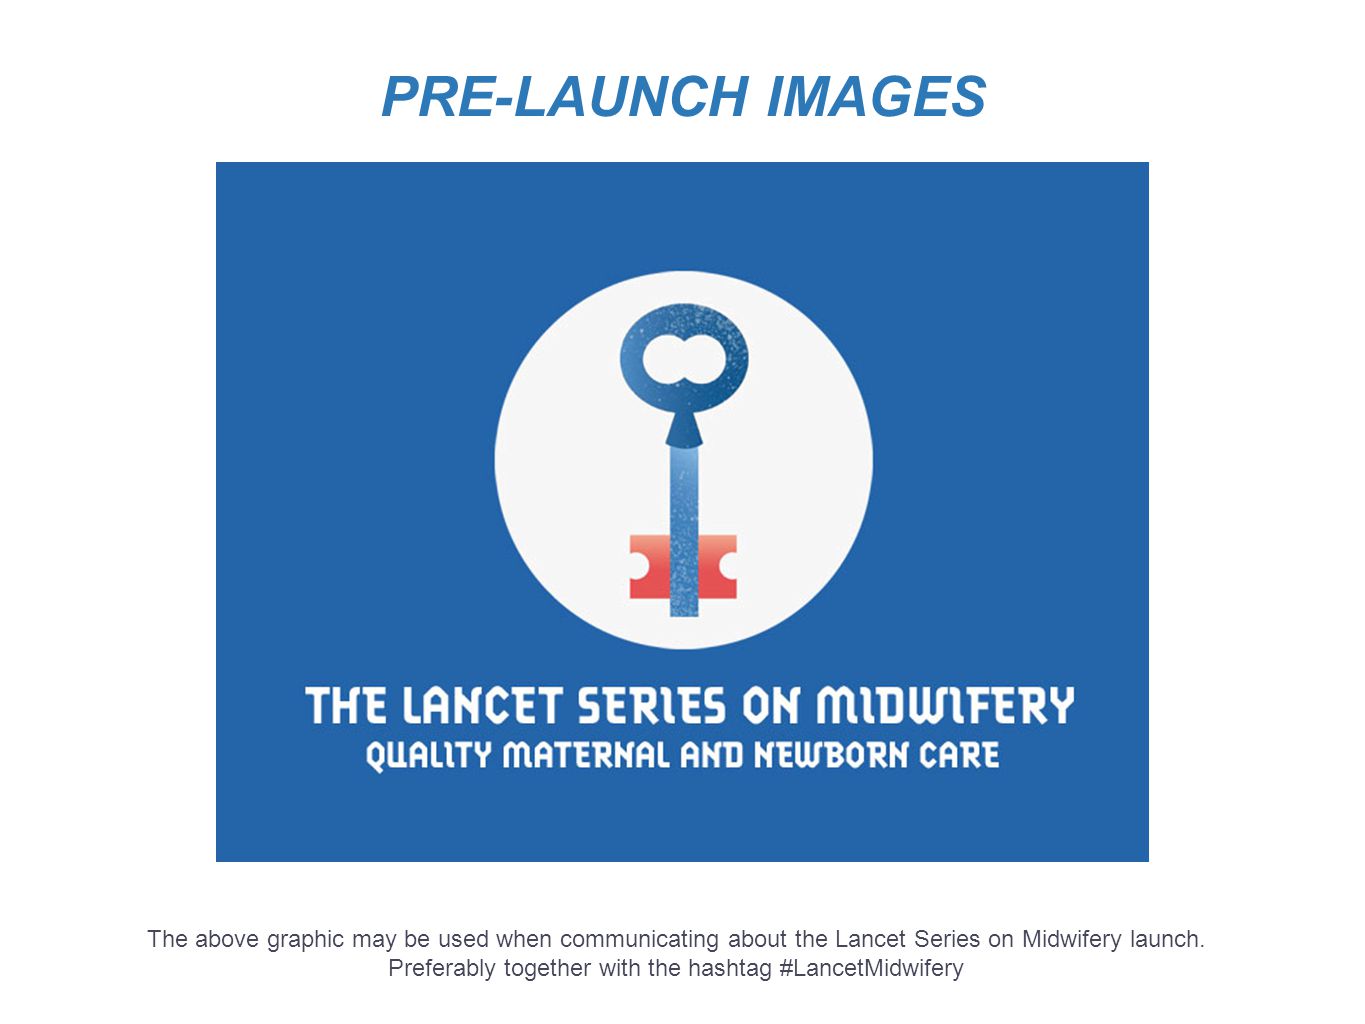 The above graphic may be used when communicating about the Lancet Series on Midwifery launch.